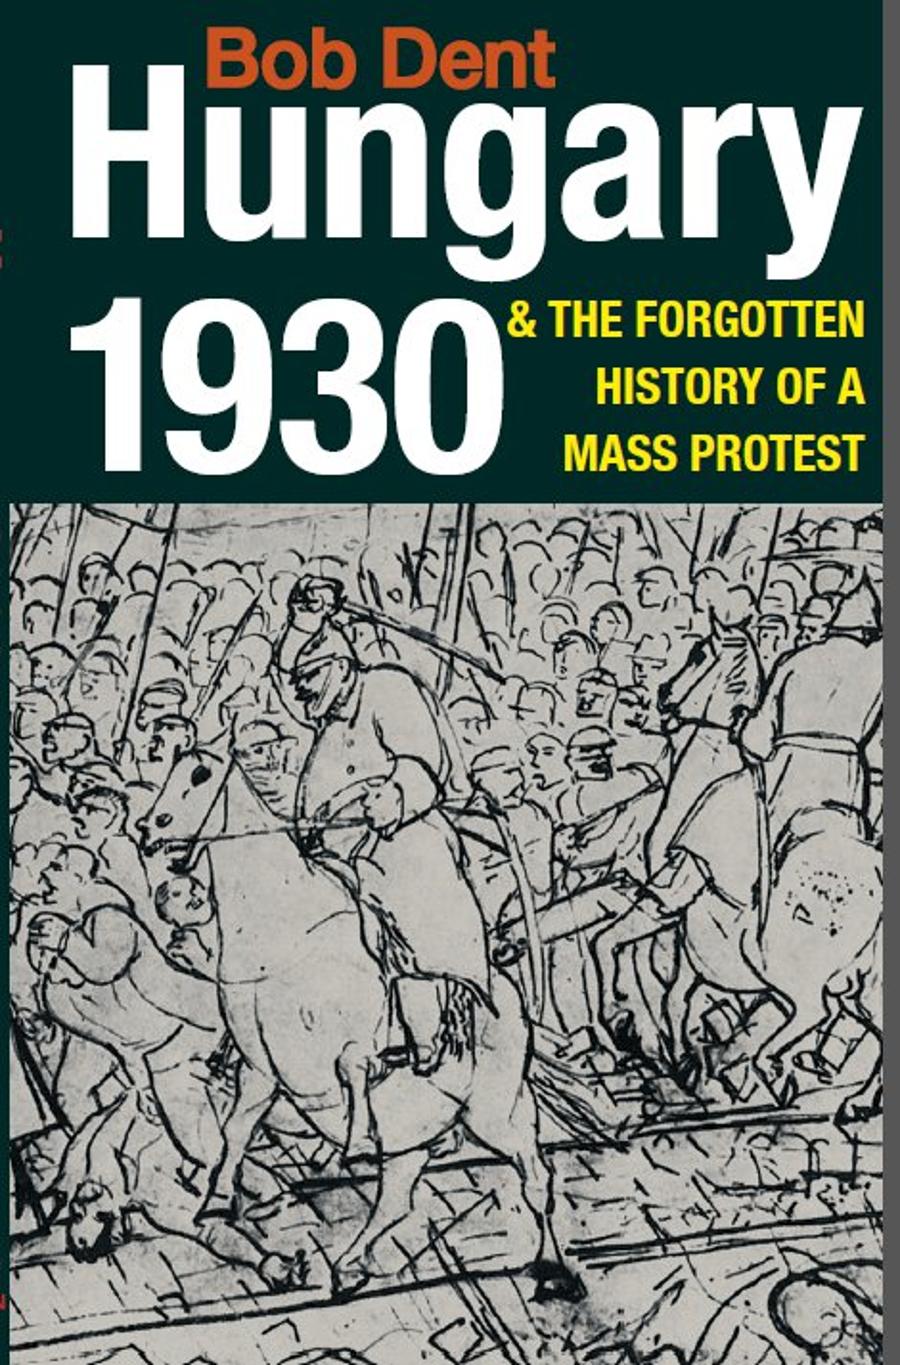 Bob Dent's New Book: Hungary 1930 & The Forgotten History Of A Mass Protest